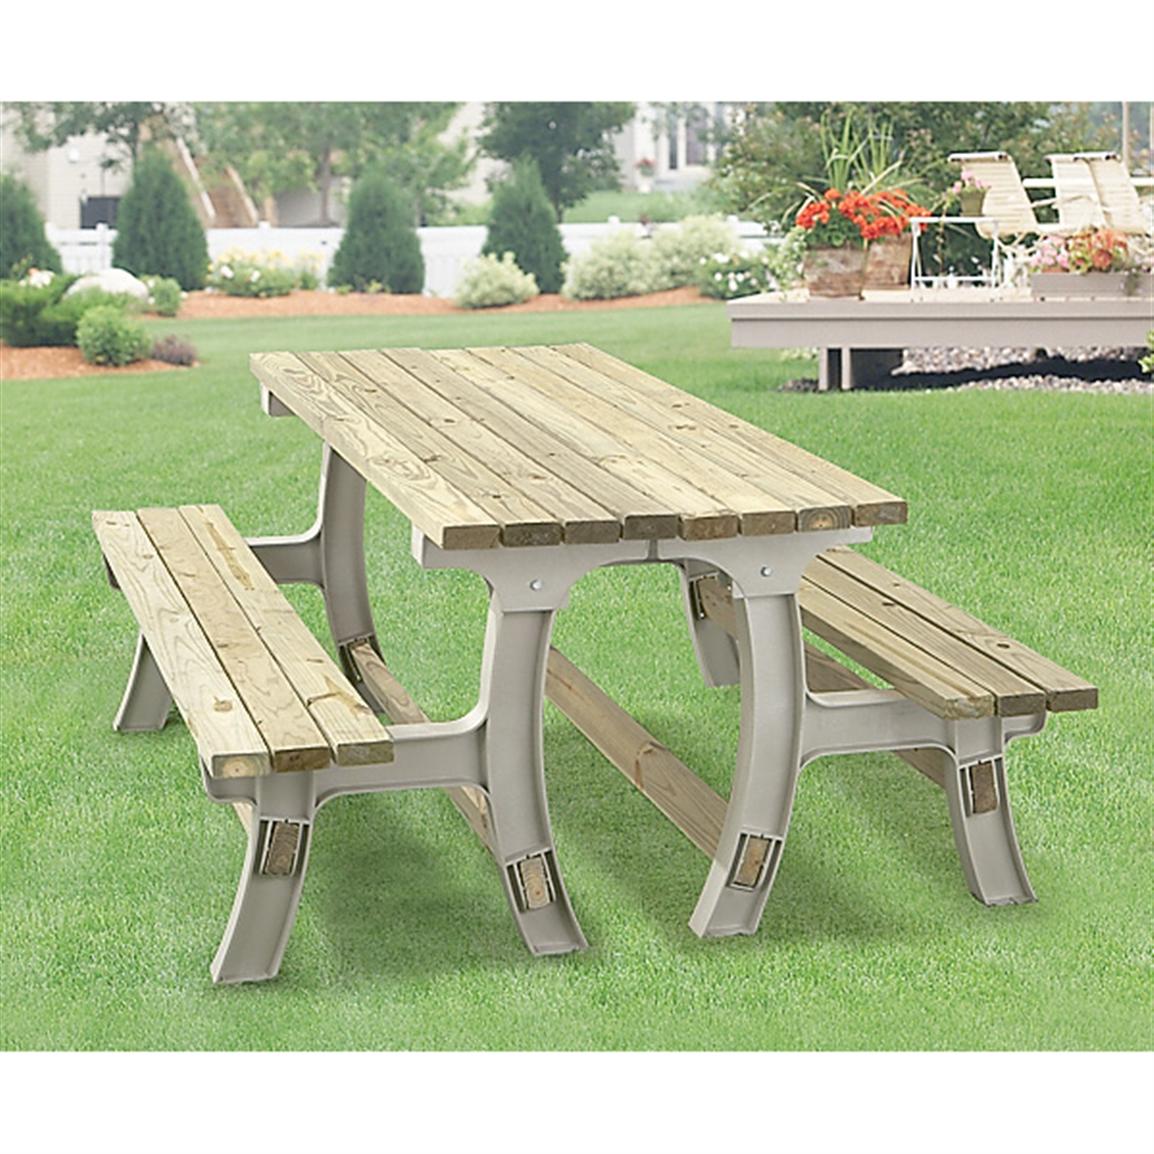 Bench To Table Kit 46325 Patio Furniture At Sportsmans Guide throughout Amazing patio bench table you must have